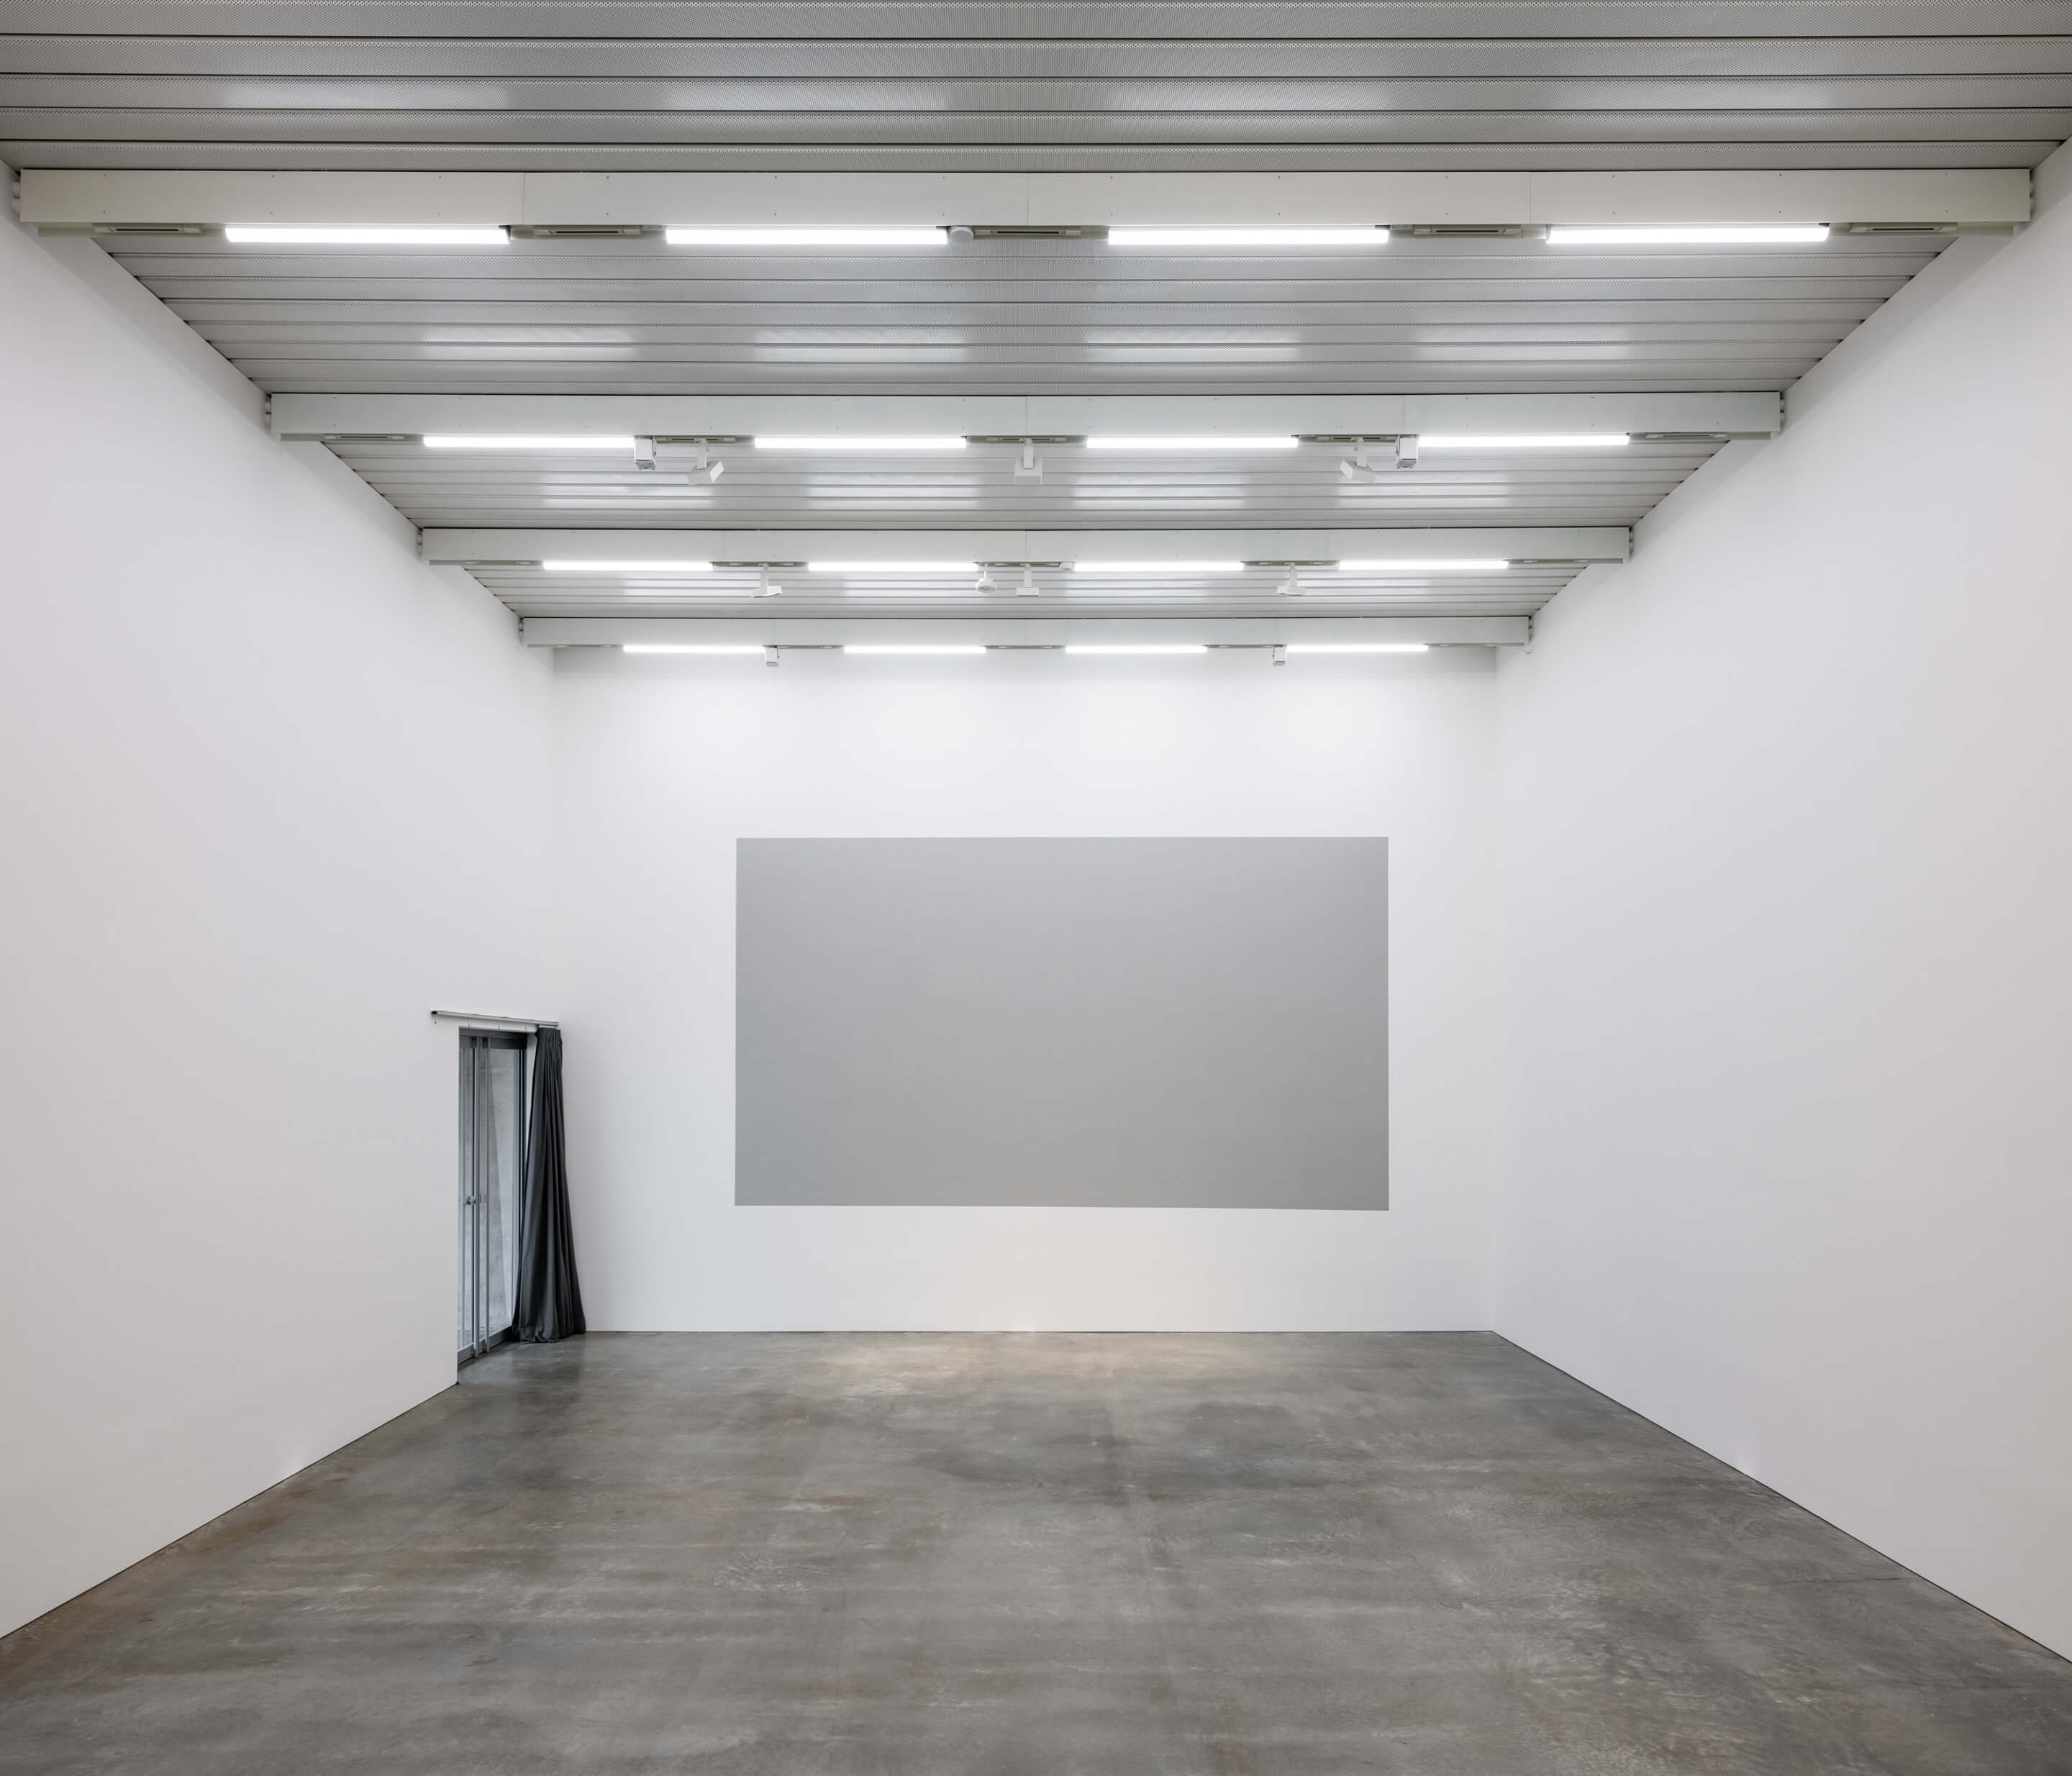 Inside of a white walled gallery space